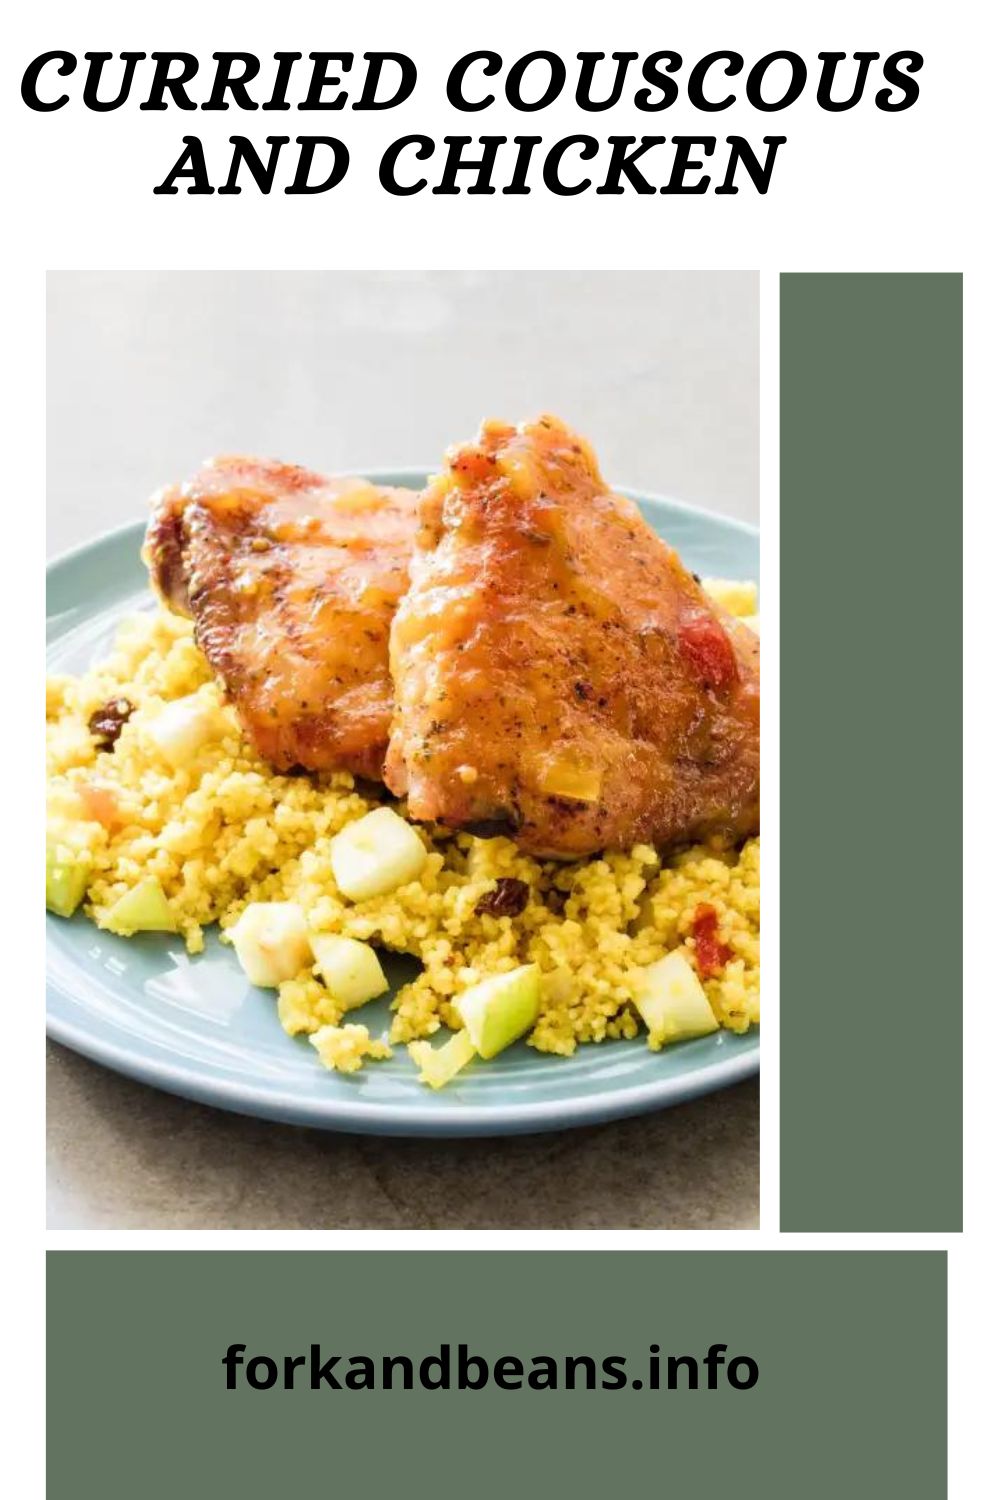 Chicken with couscous and curry